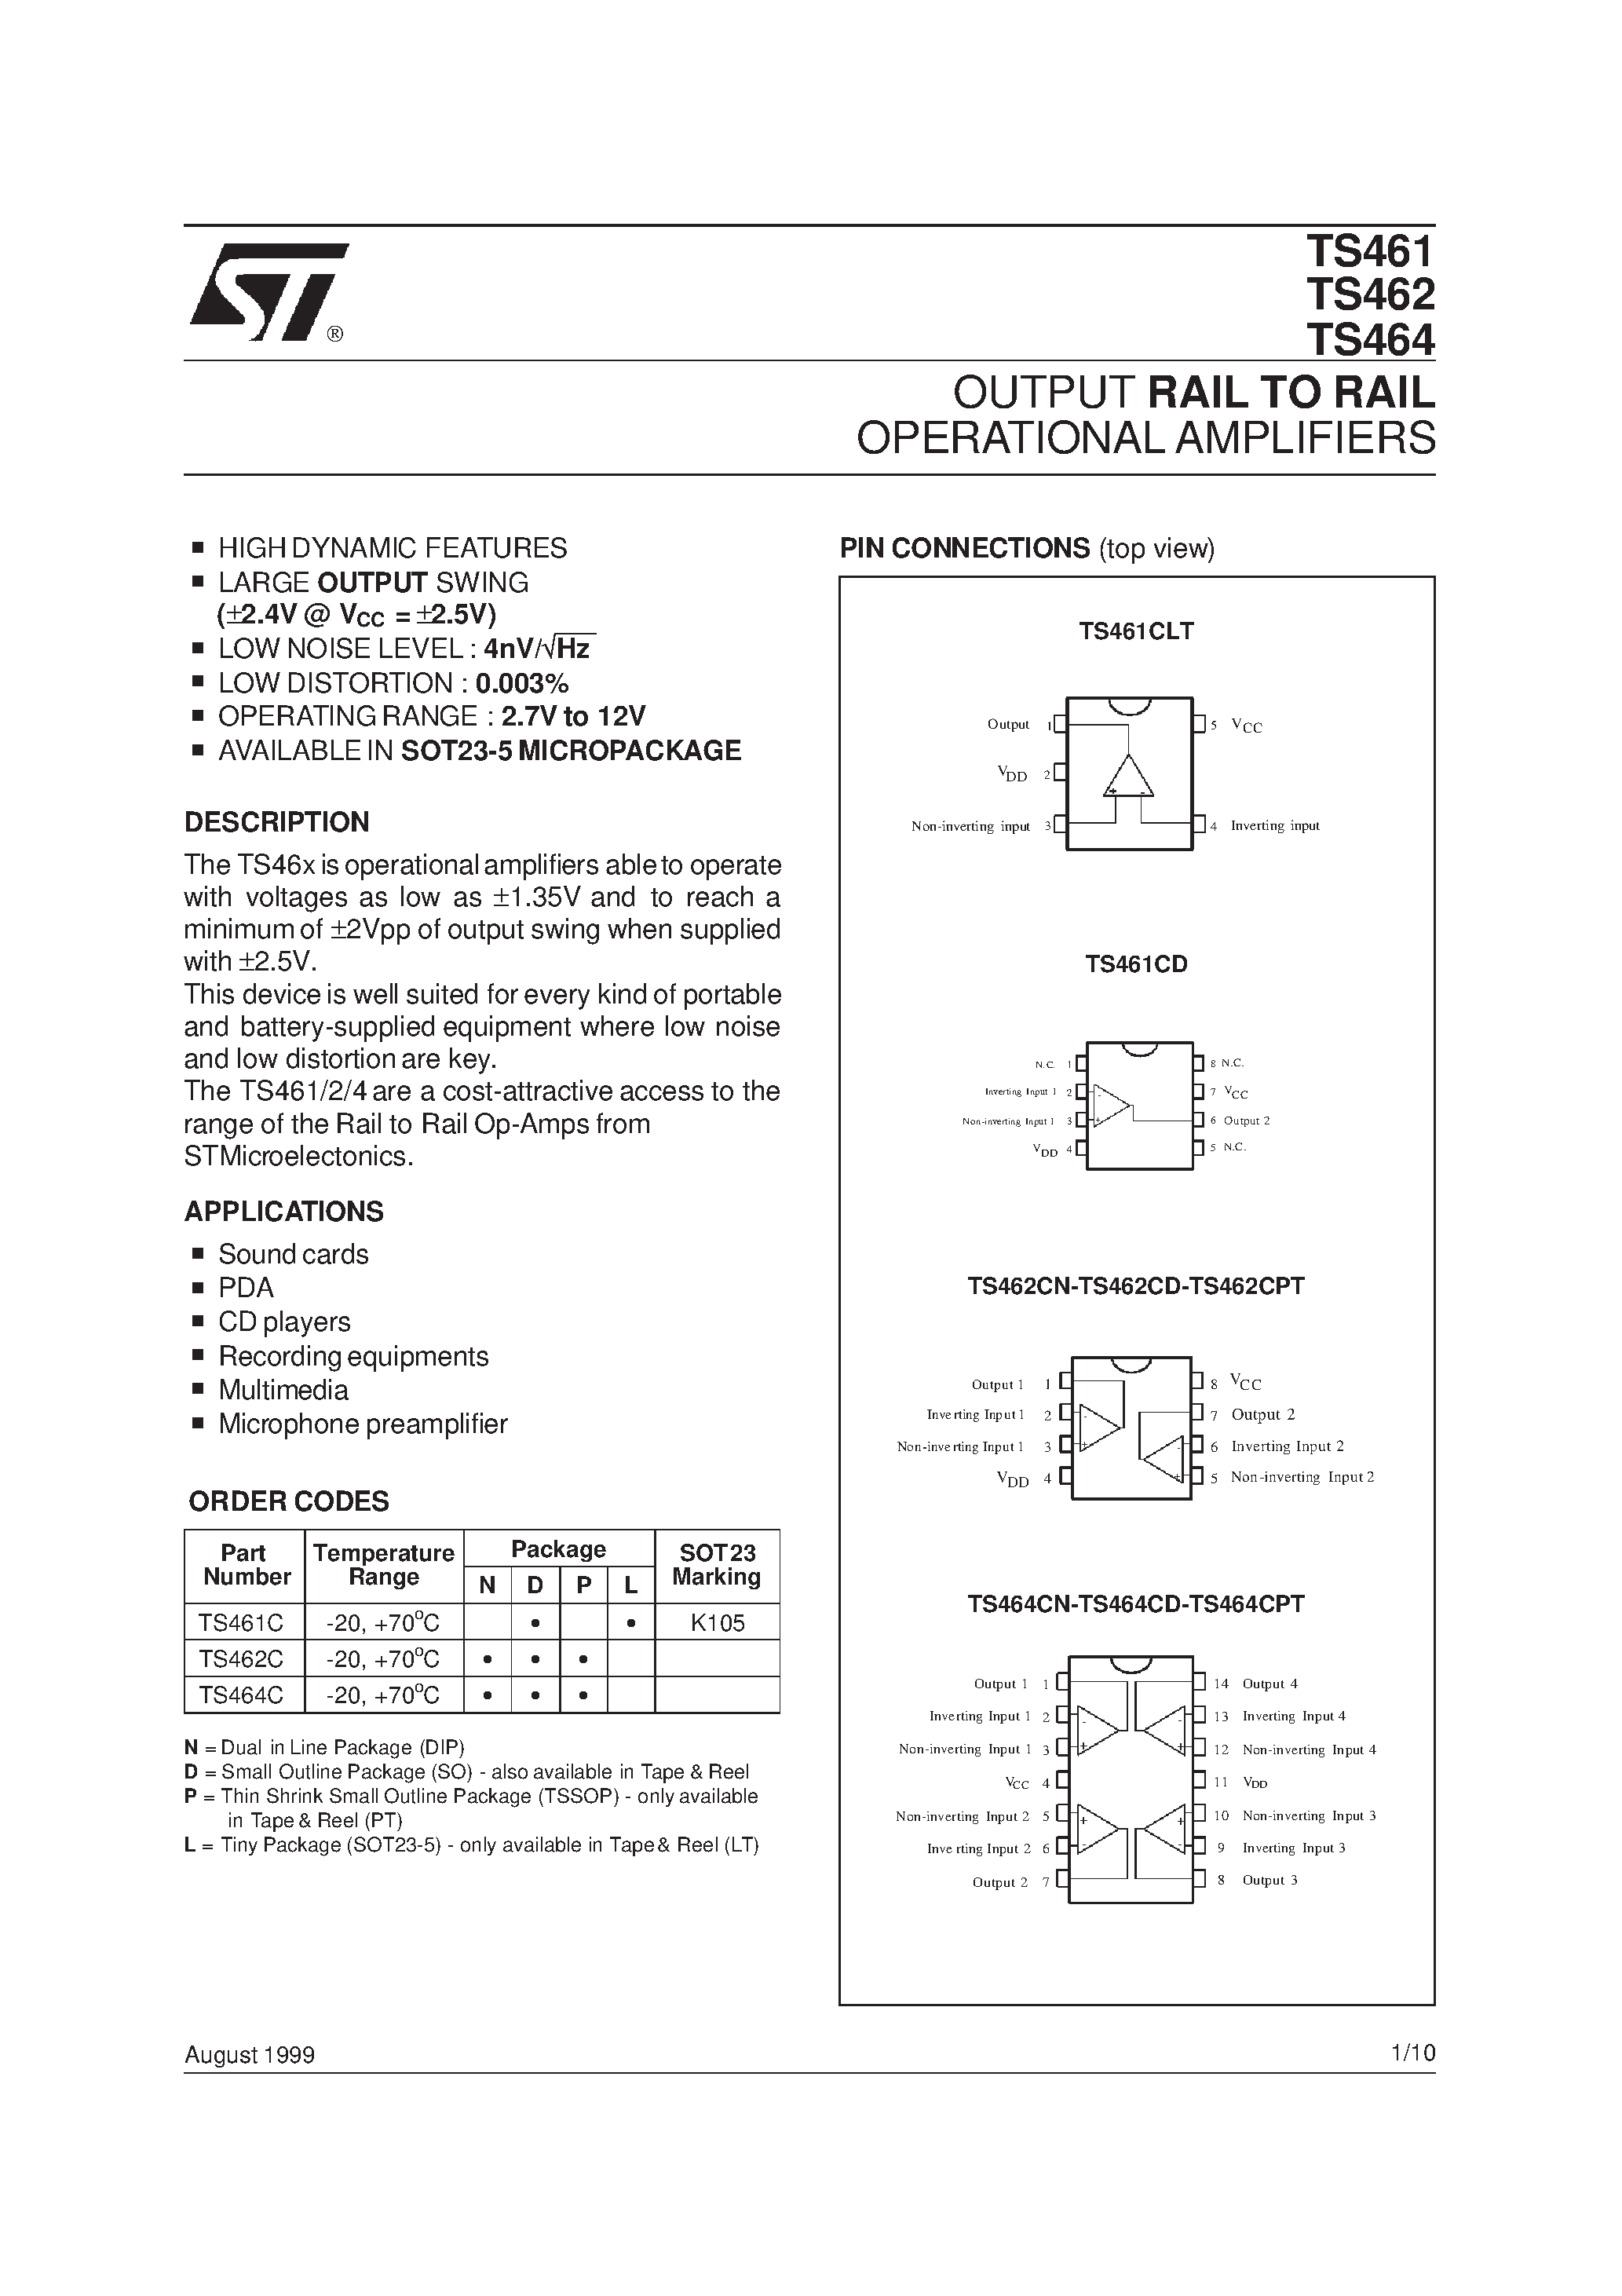 Datasheet TS464CPT - OUTPUT RAIL TO RAIL OPERATIONAL AMPLIFIERS page 1